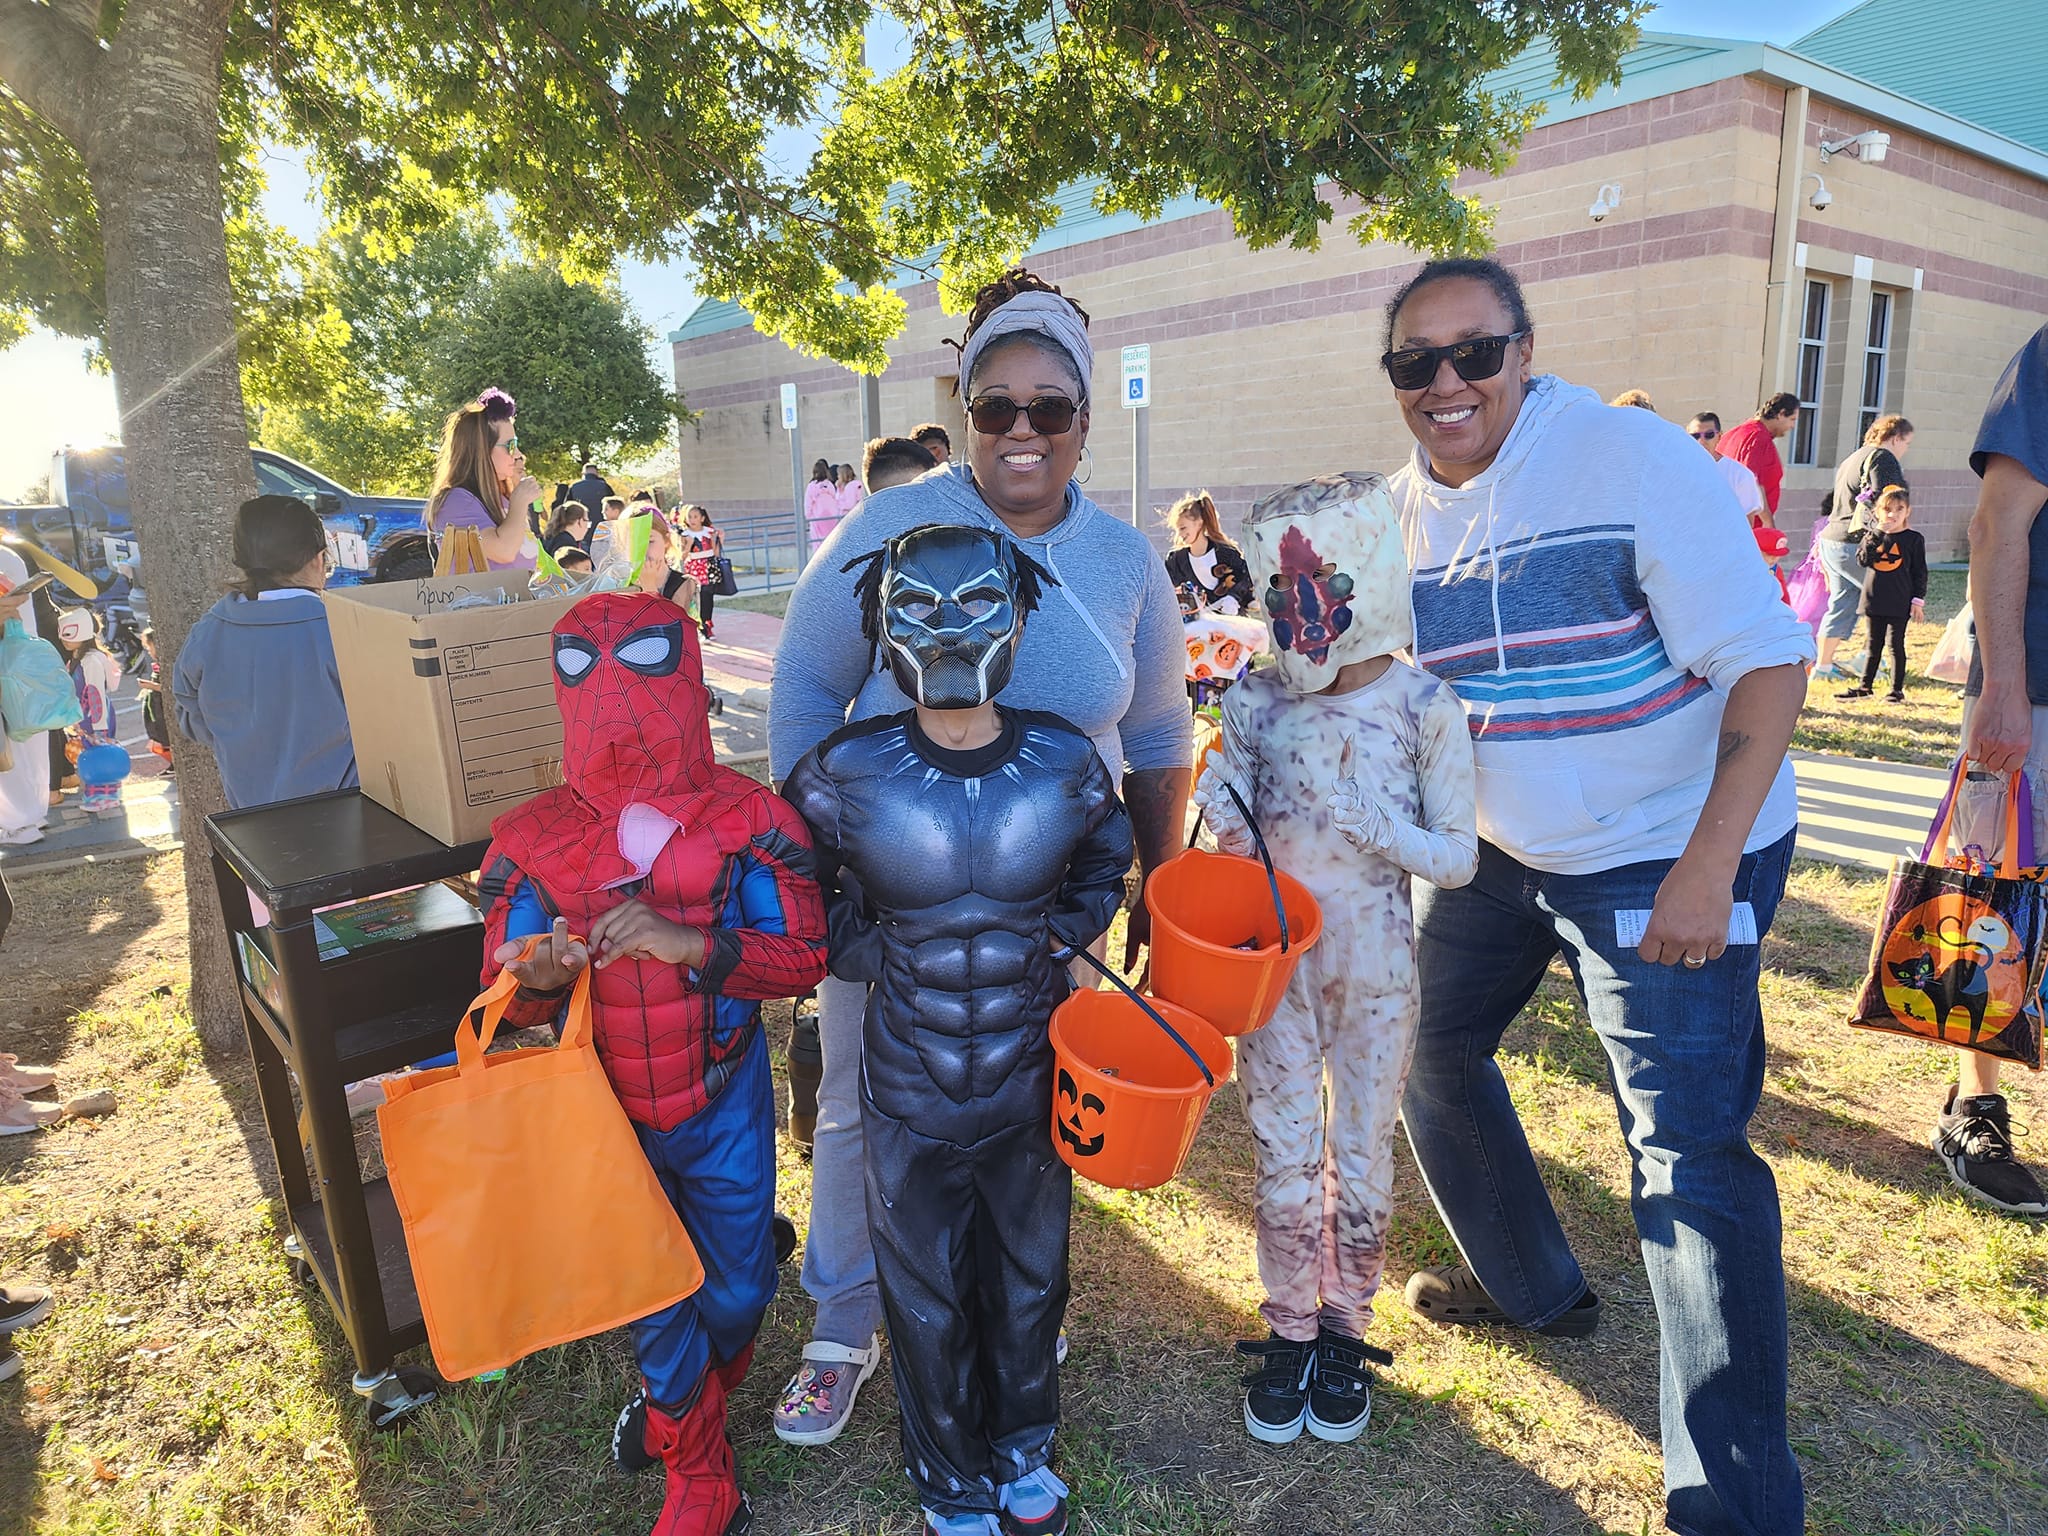 Family with children dresses in Spiderman and Black Panther costumes.